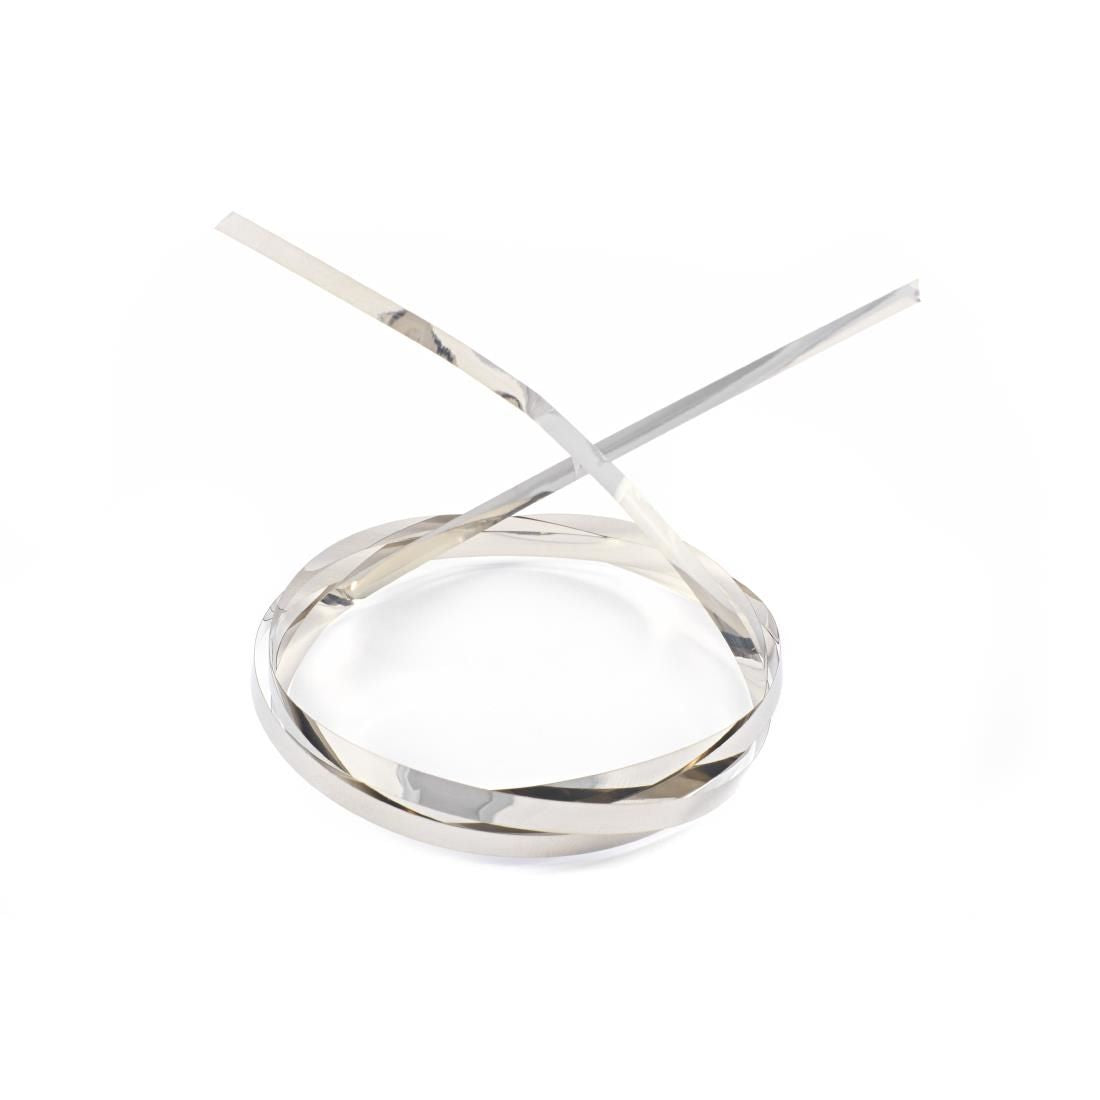 Buffalo Resistance Wire 1 metre JD Catering Equipment Solutions Ltd